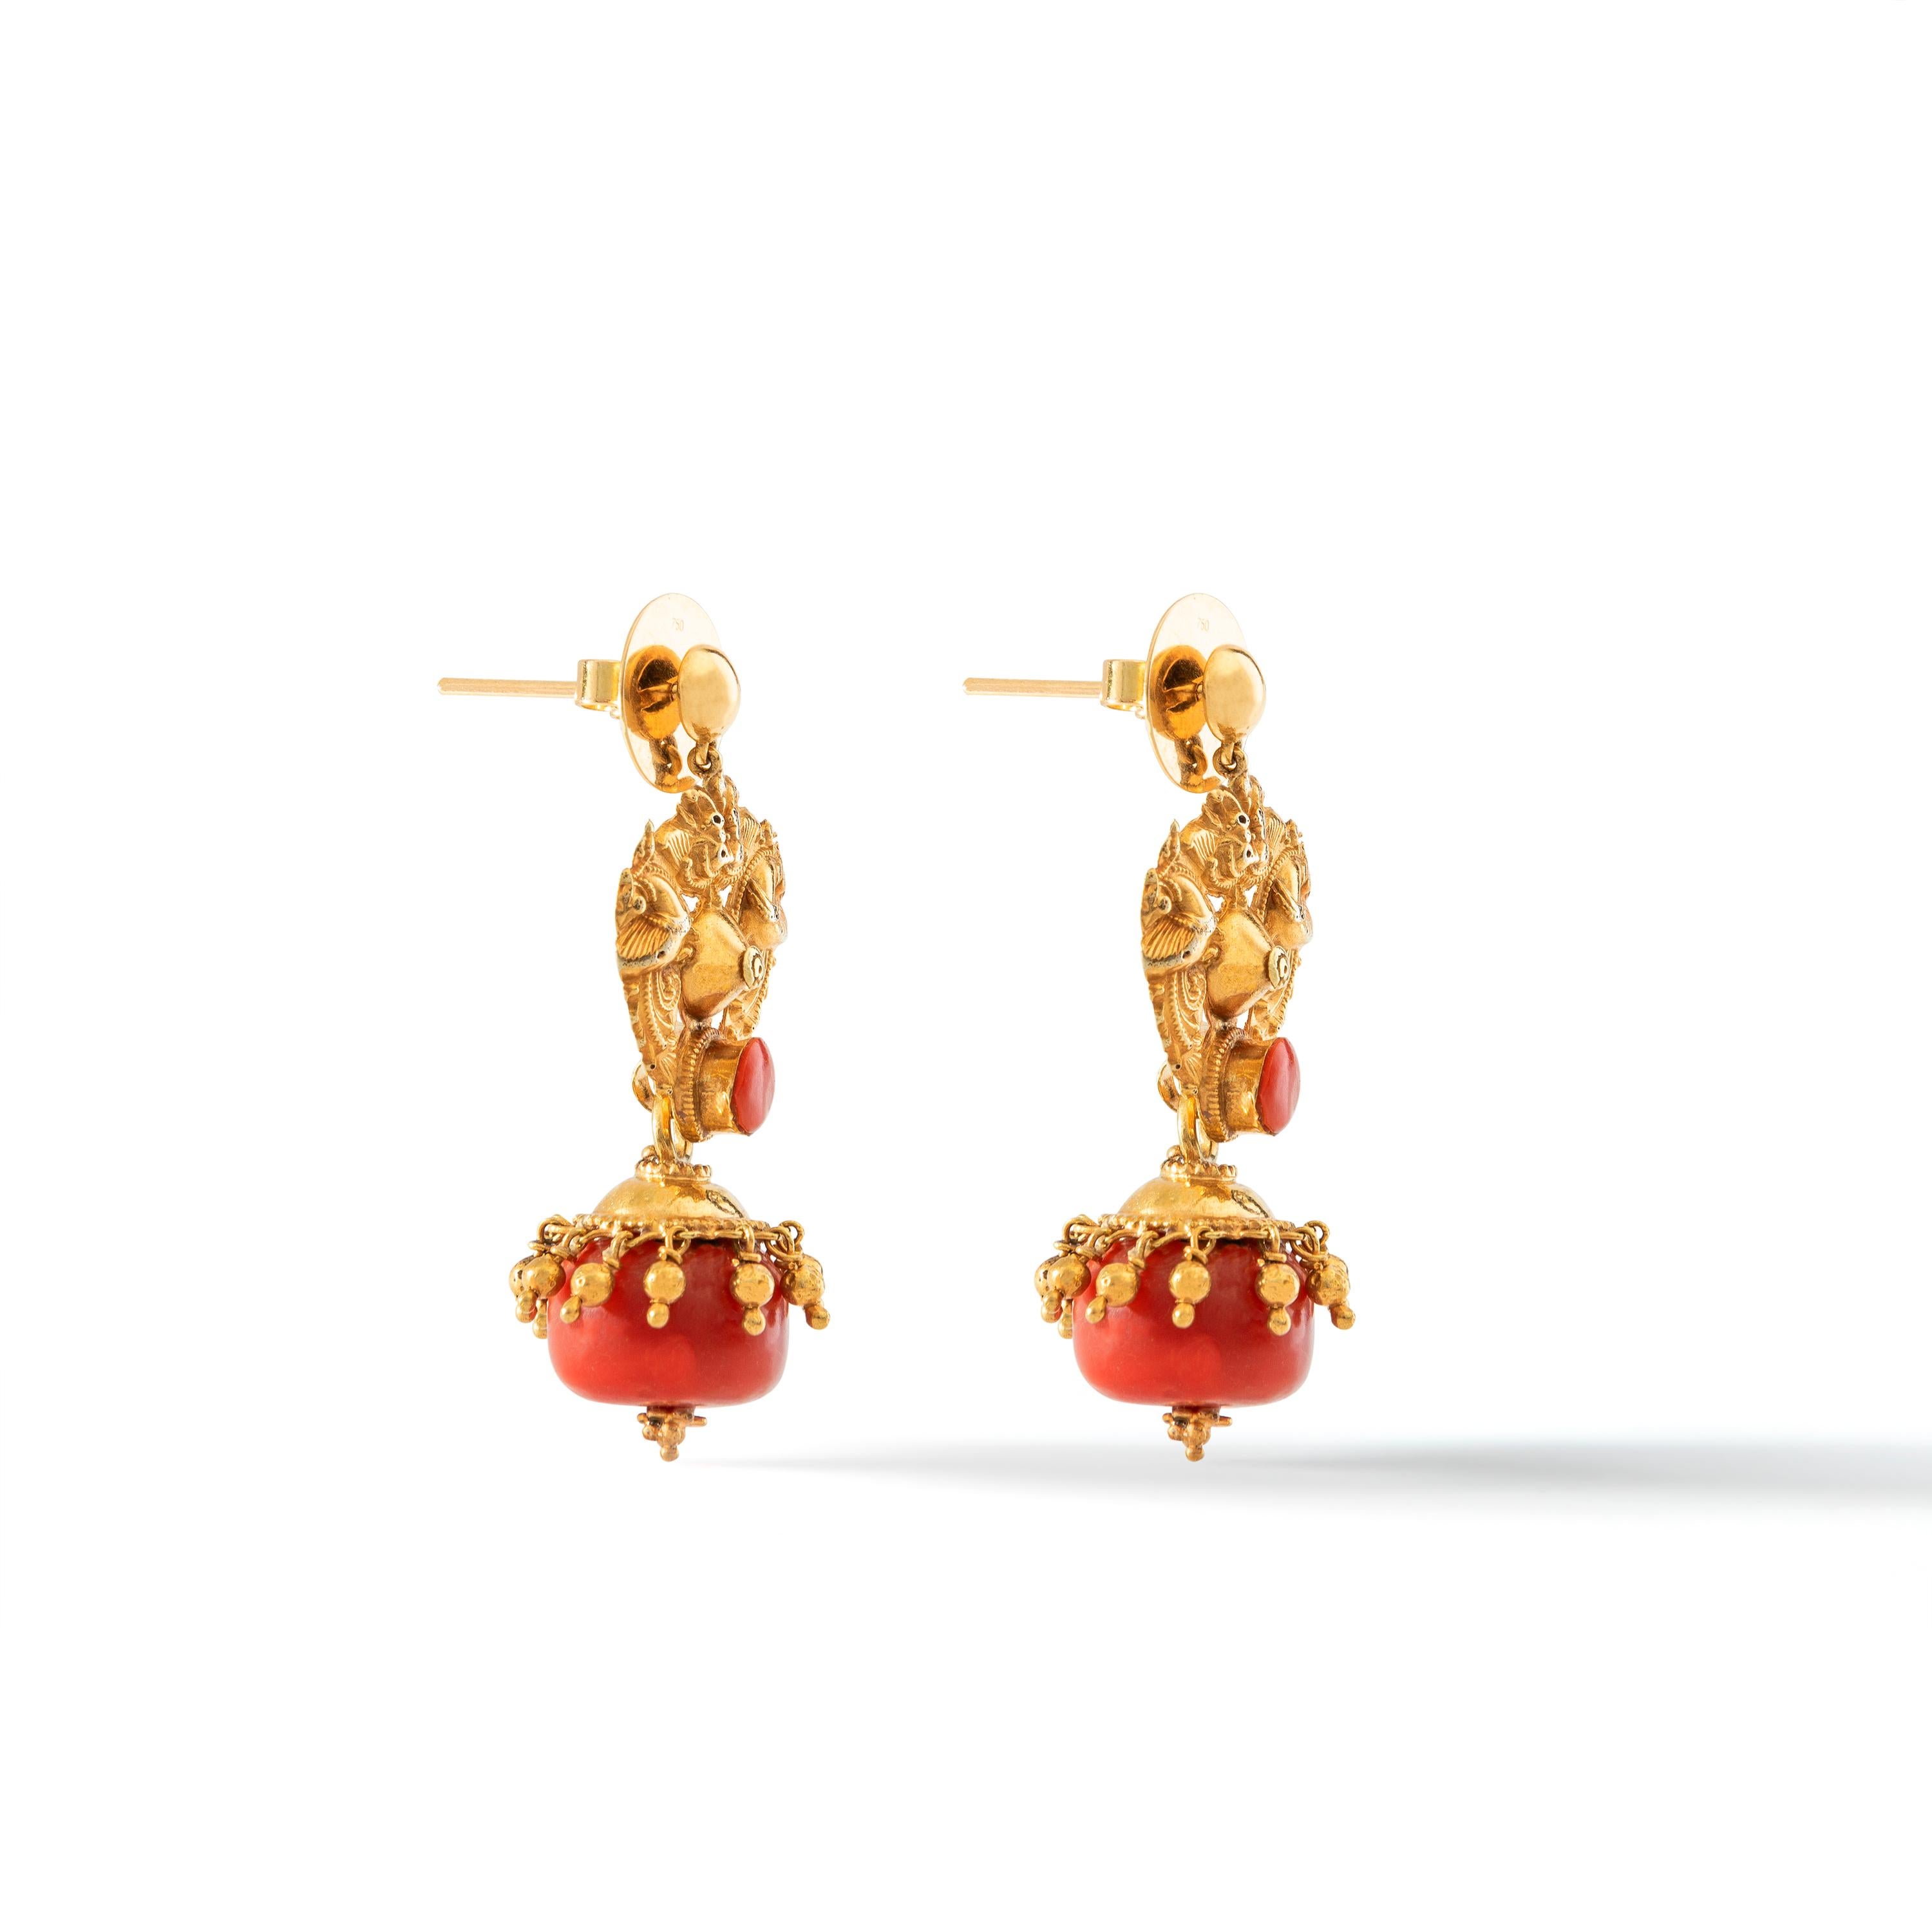 Venetian Antique Coral and carved yellow Gold Earrings.
Coral type: corallium rubrum.
Early 20th Century.

Total height: 1.57 inch (4.00 centimeters).
Width at maximum: 0.79 inch (2.00 centimeters).
Total weight: 12.28 grams

Former collection of a